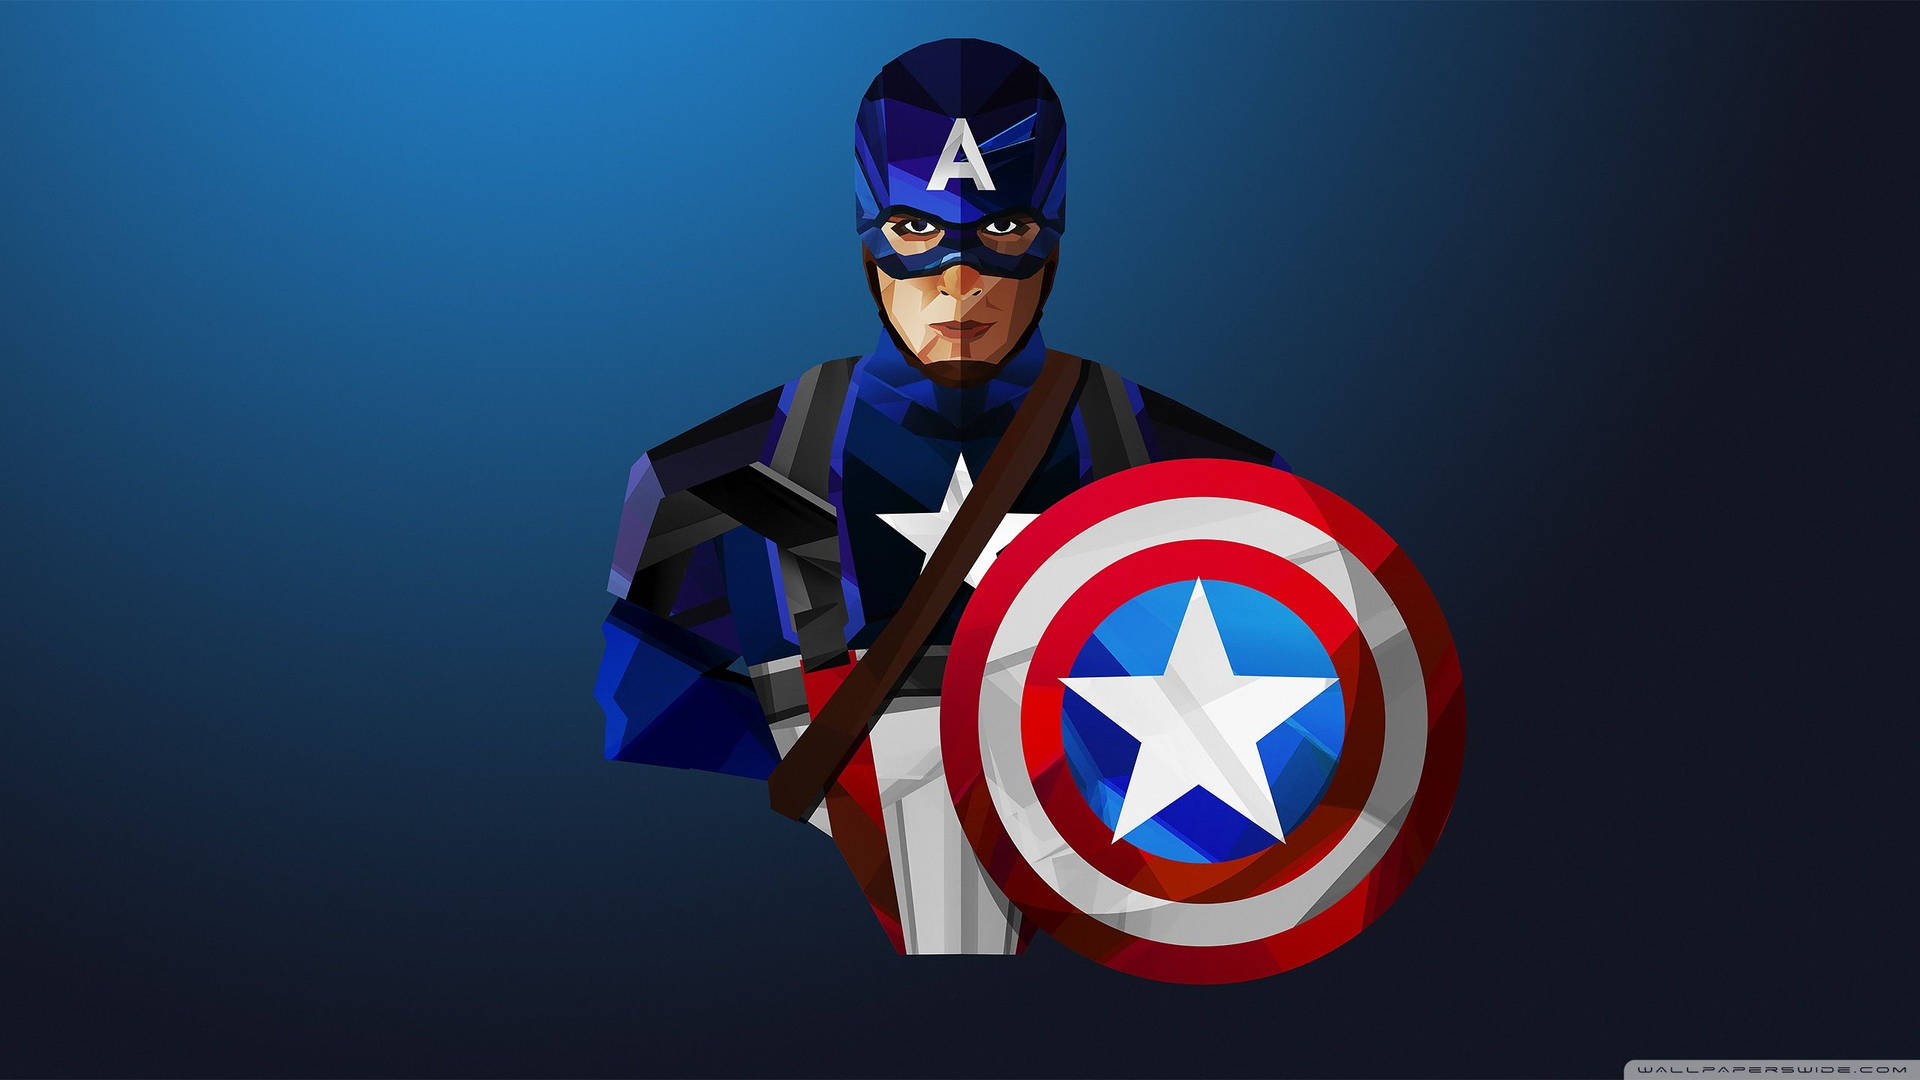 Blue Captain America Low Poly Art Background